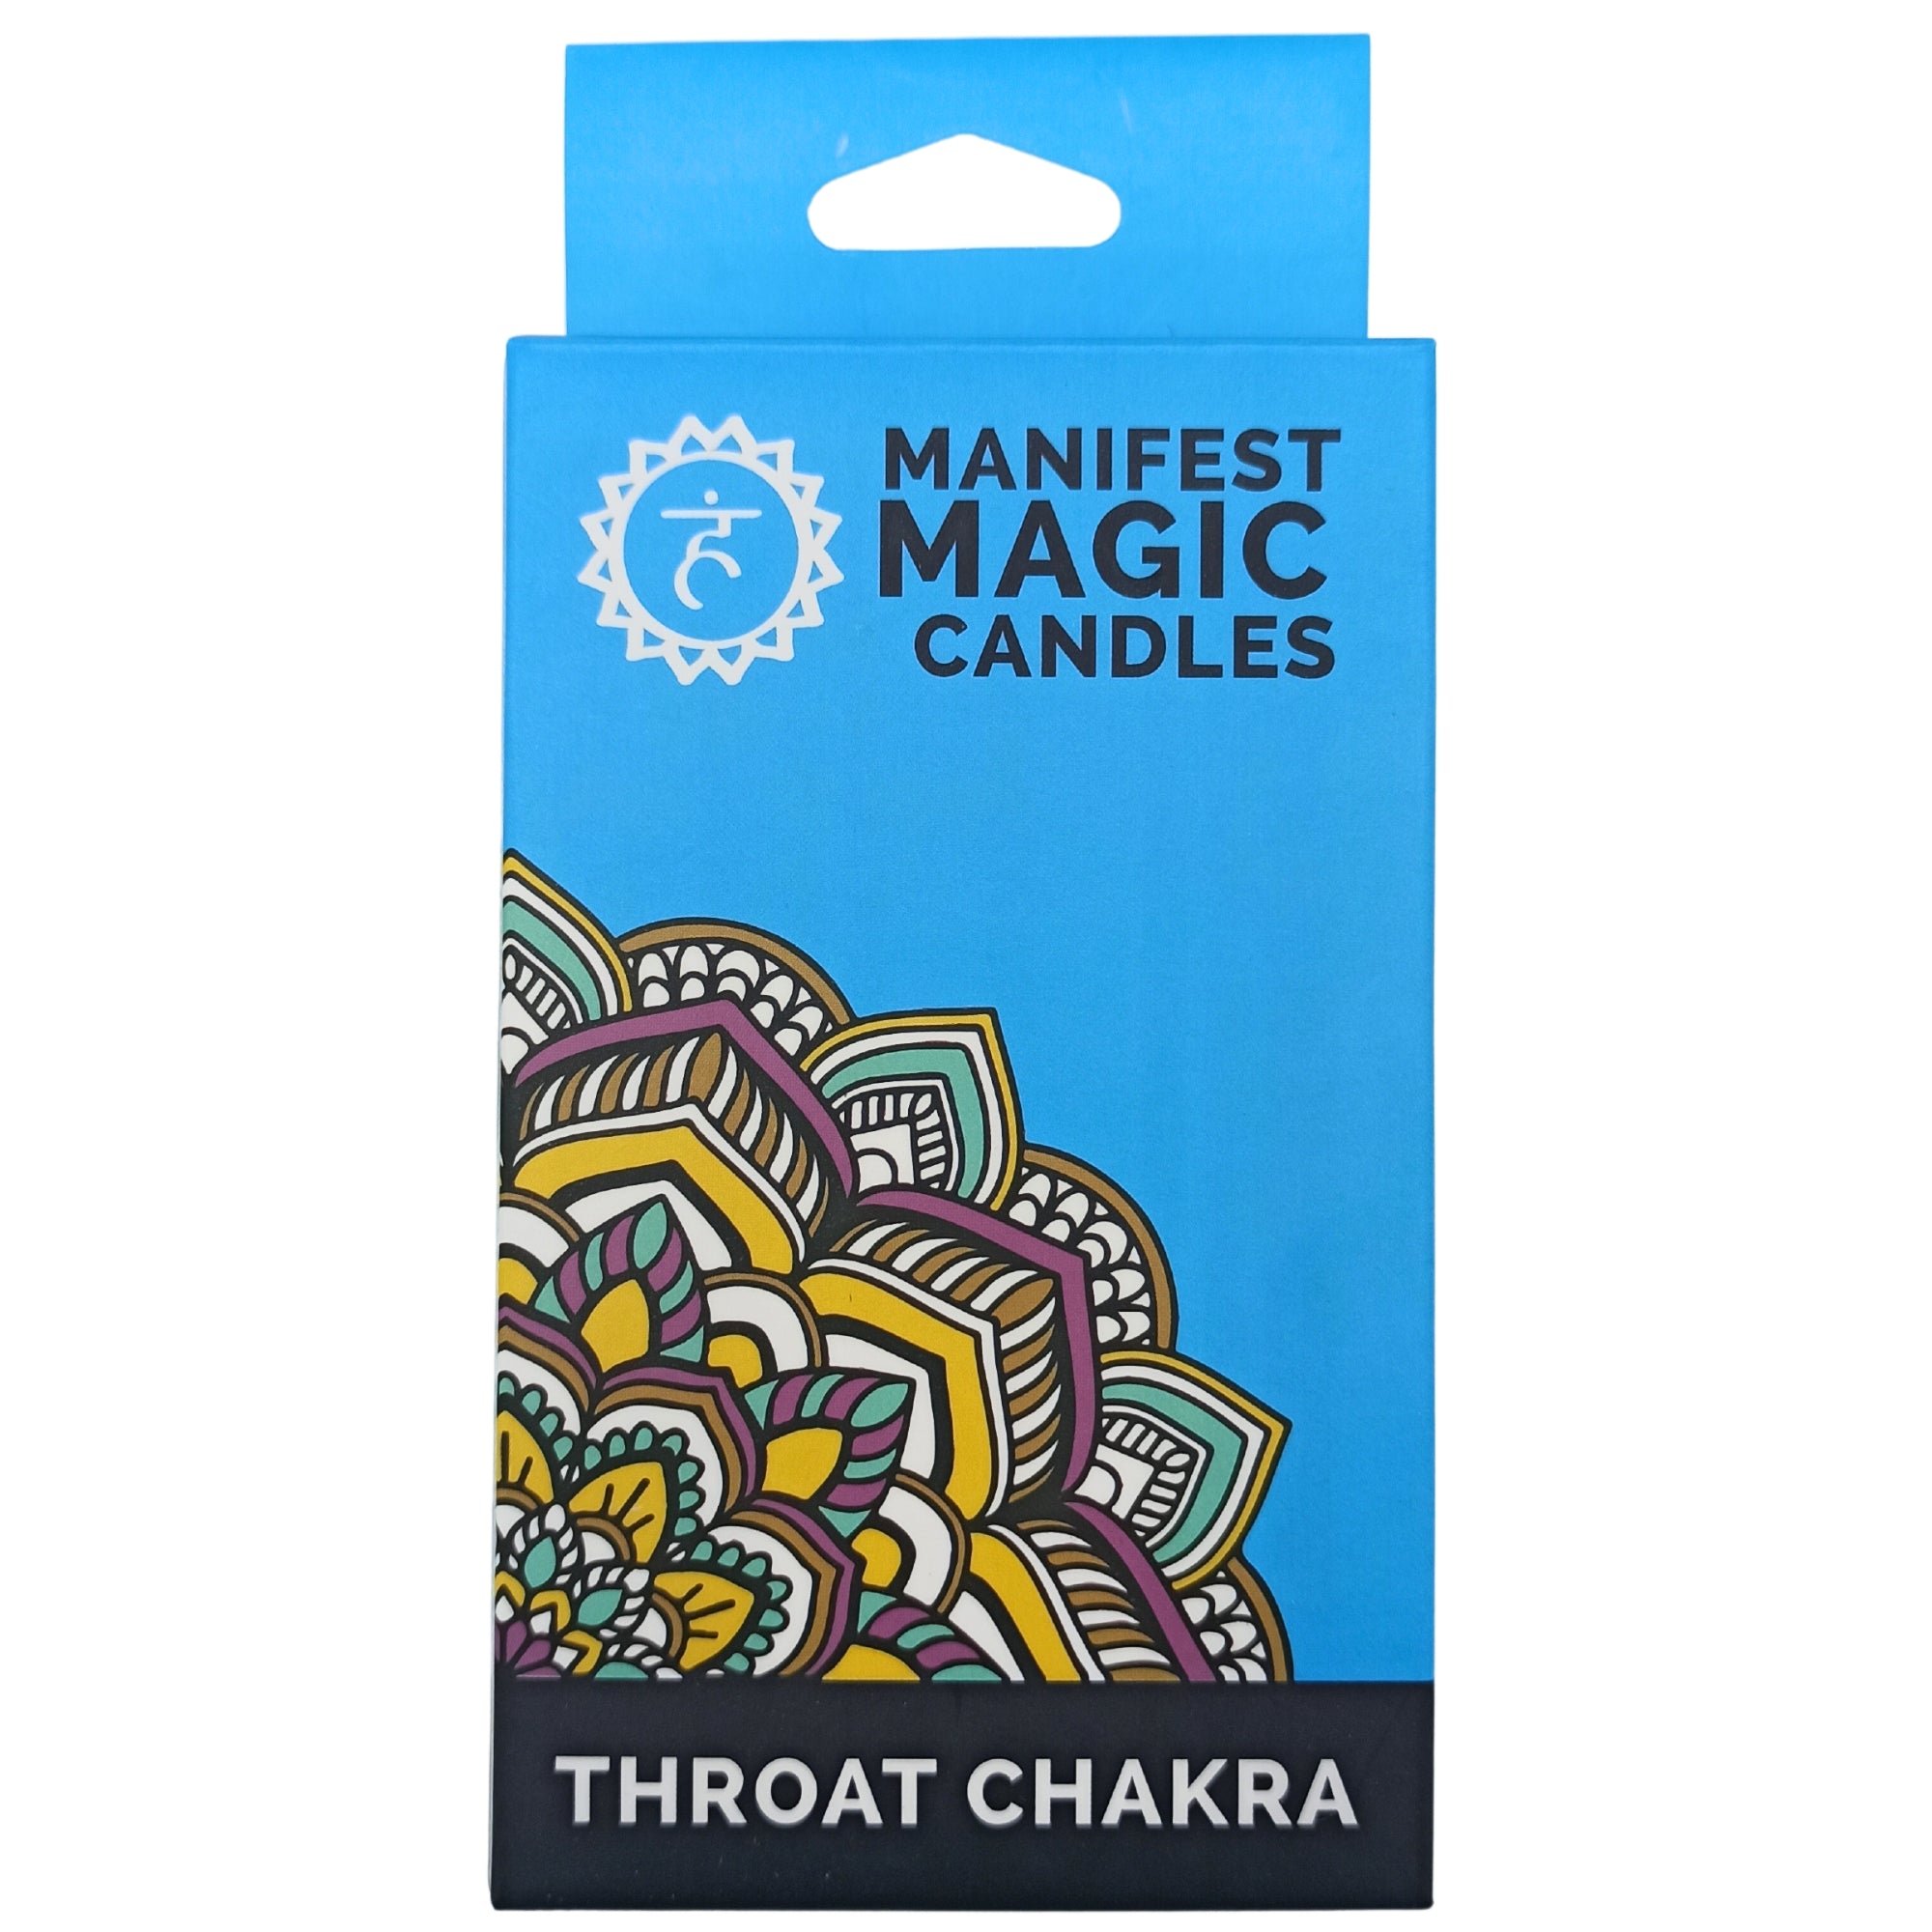 View Manifest Magic Candles pack of 12 Blue Throat Chakra information